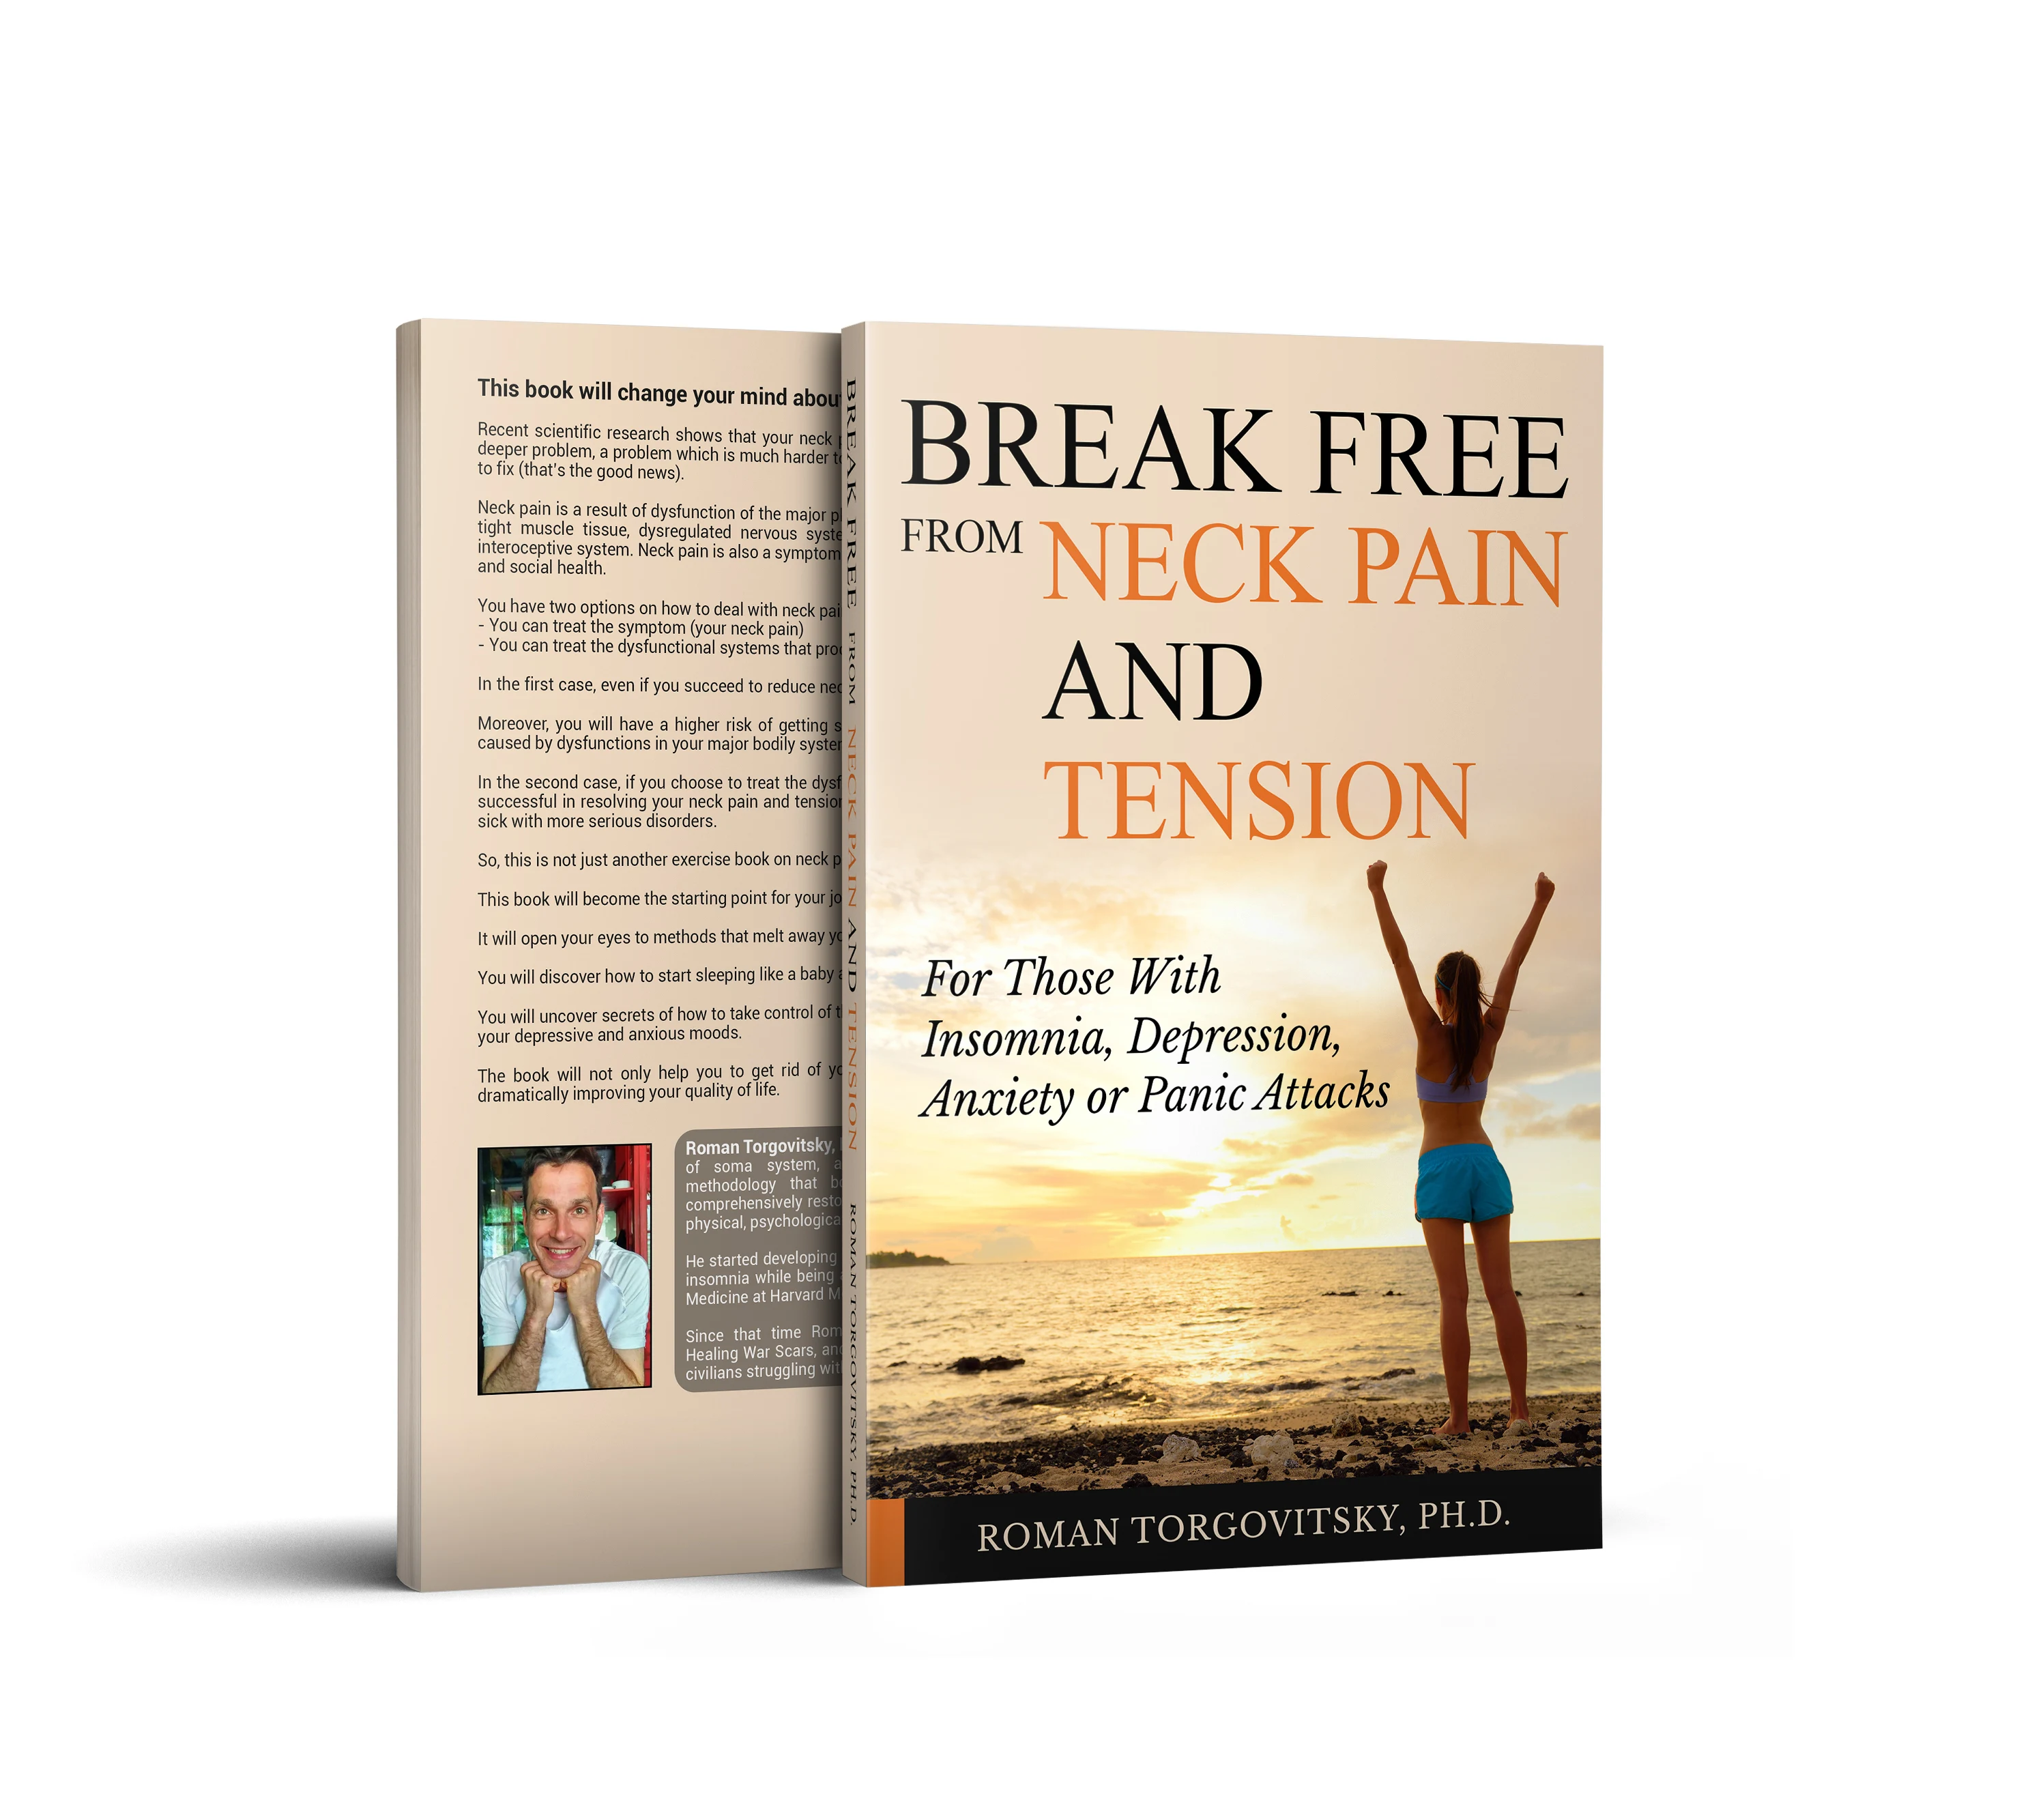 FREE: Break Free From Neck Pain & Tension: For Those With Insomnia, Depression, Anxiety or Panic Attacks by Roman Torgovitsky Ph.D.